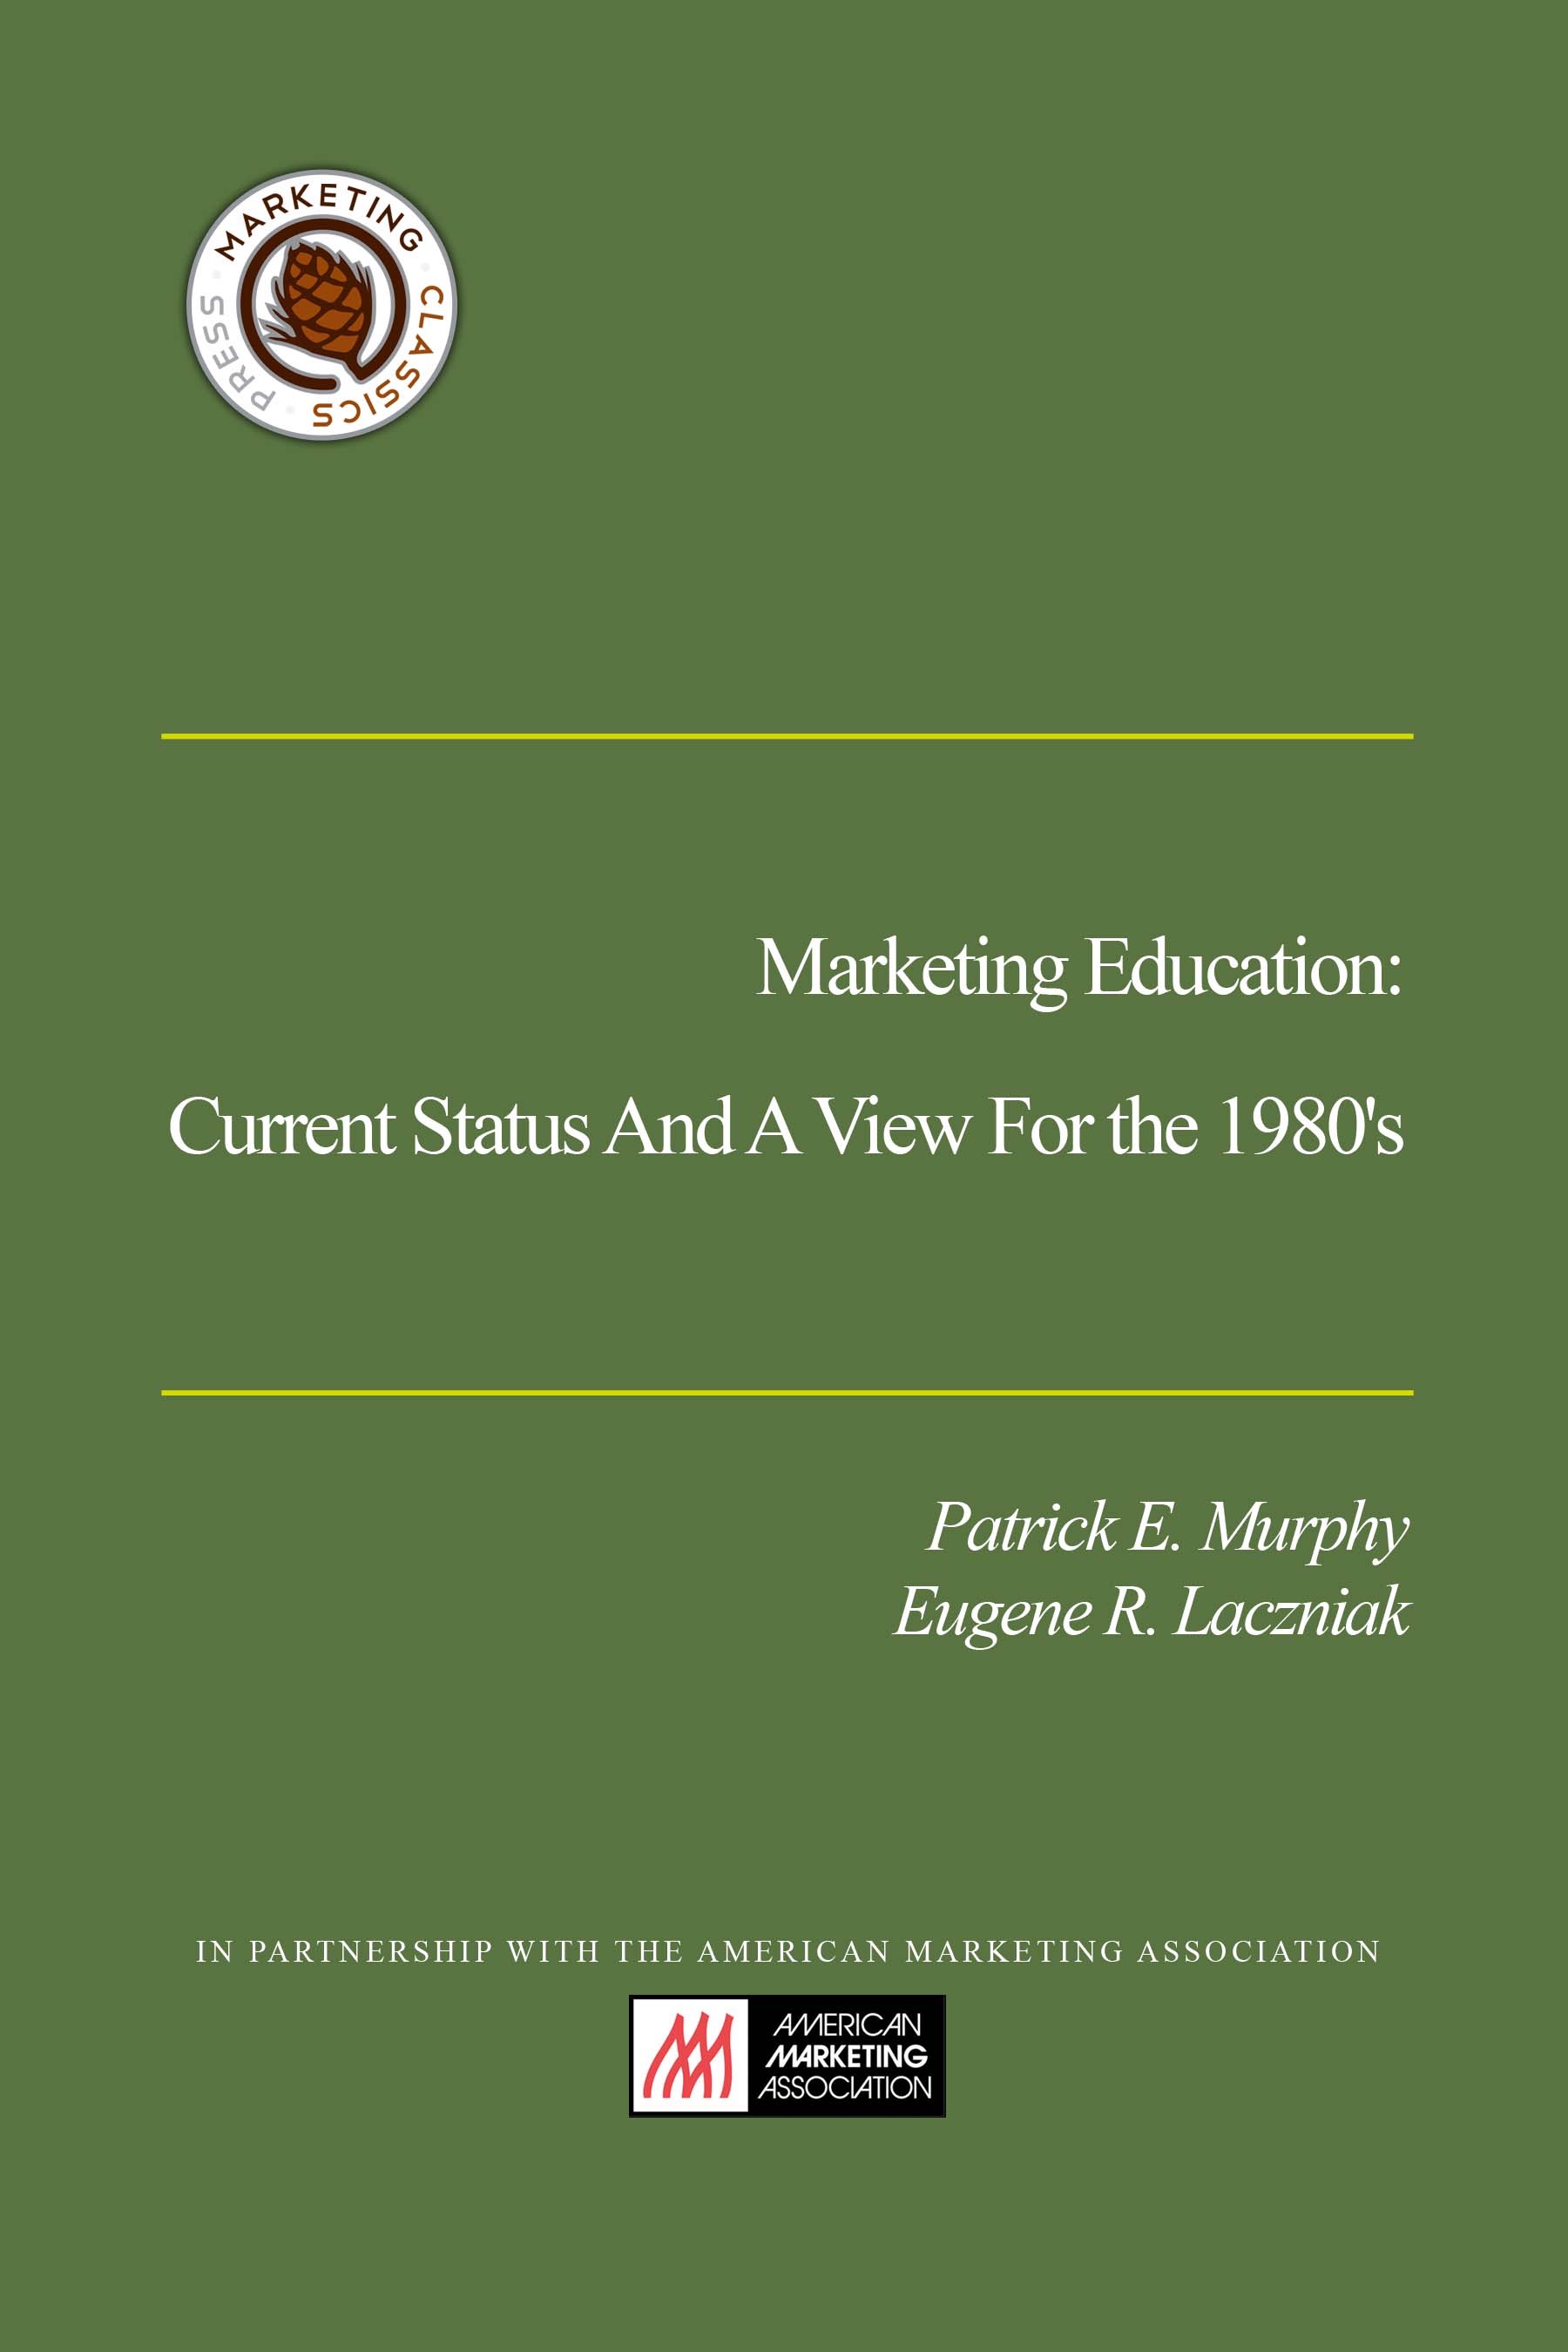 Marketing Education Current Status And A View For The 1980's